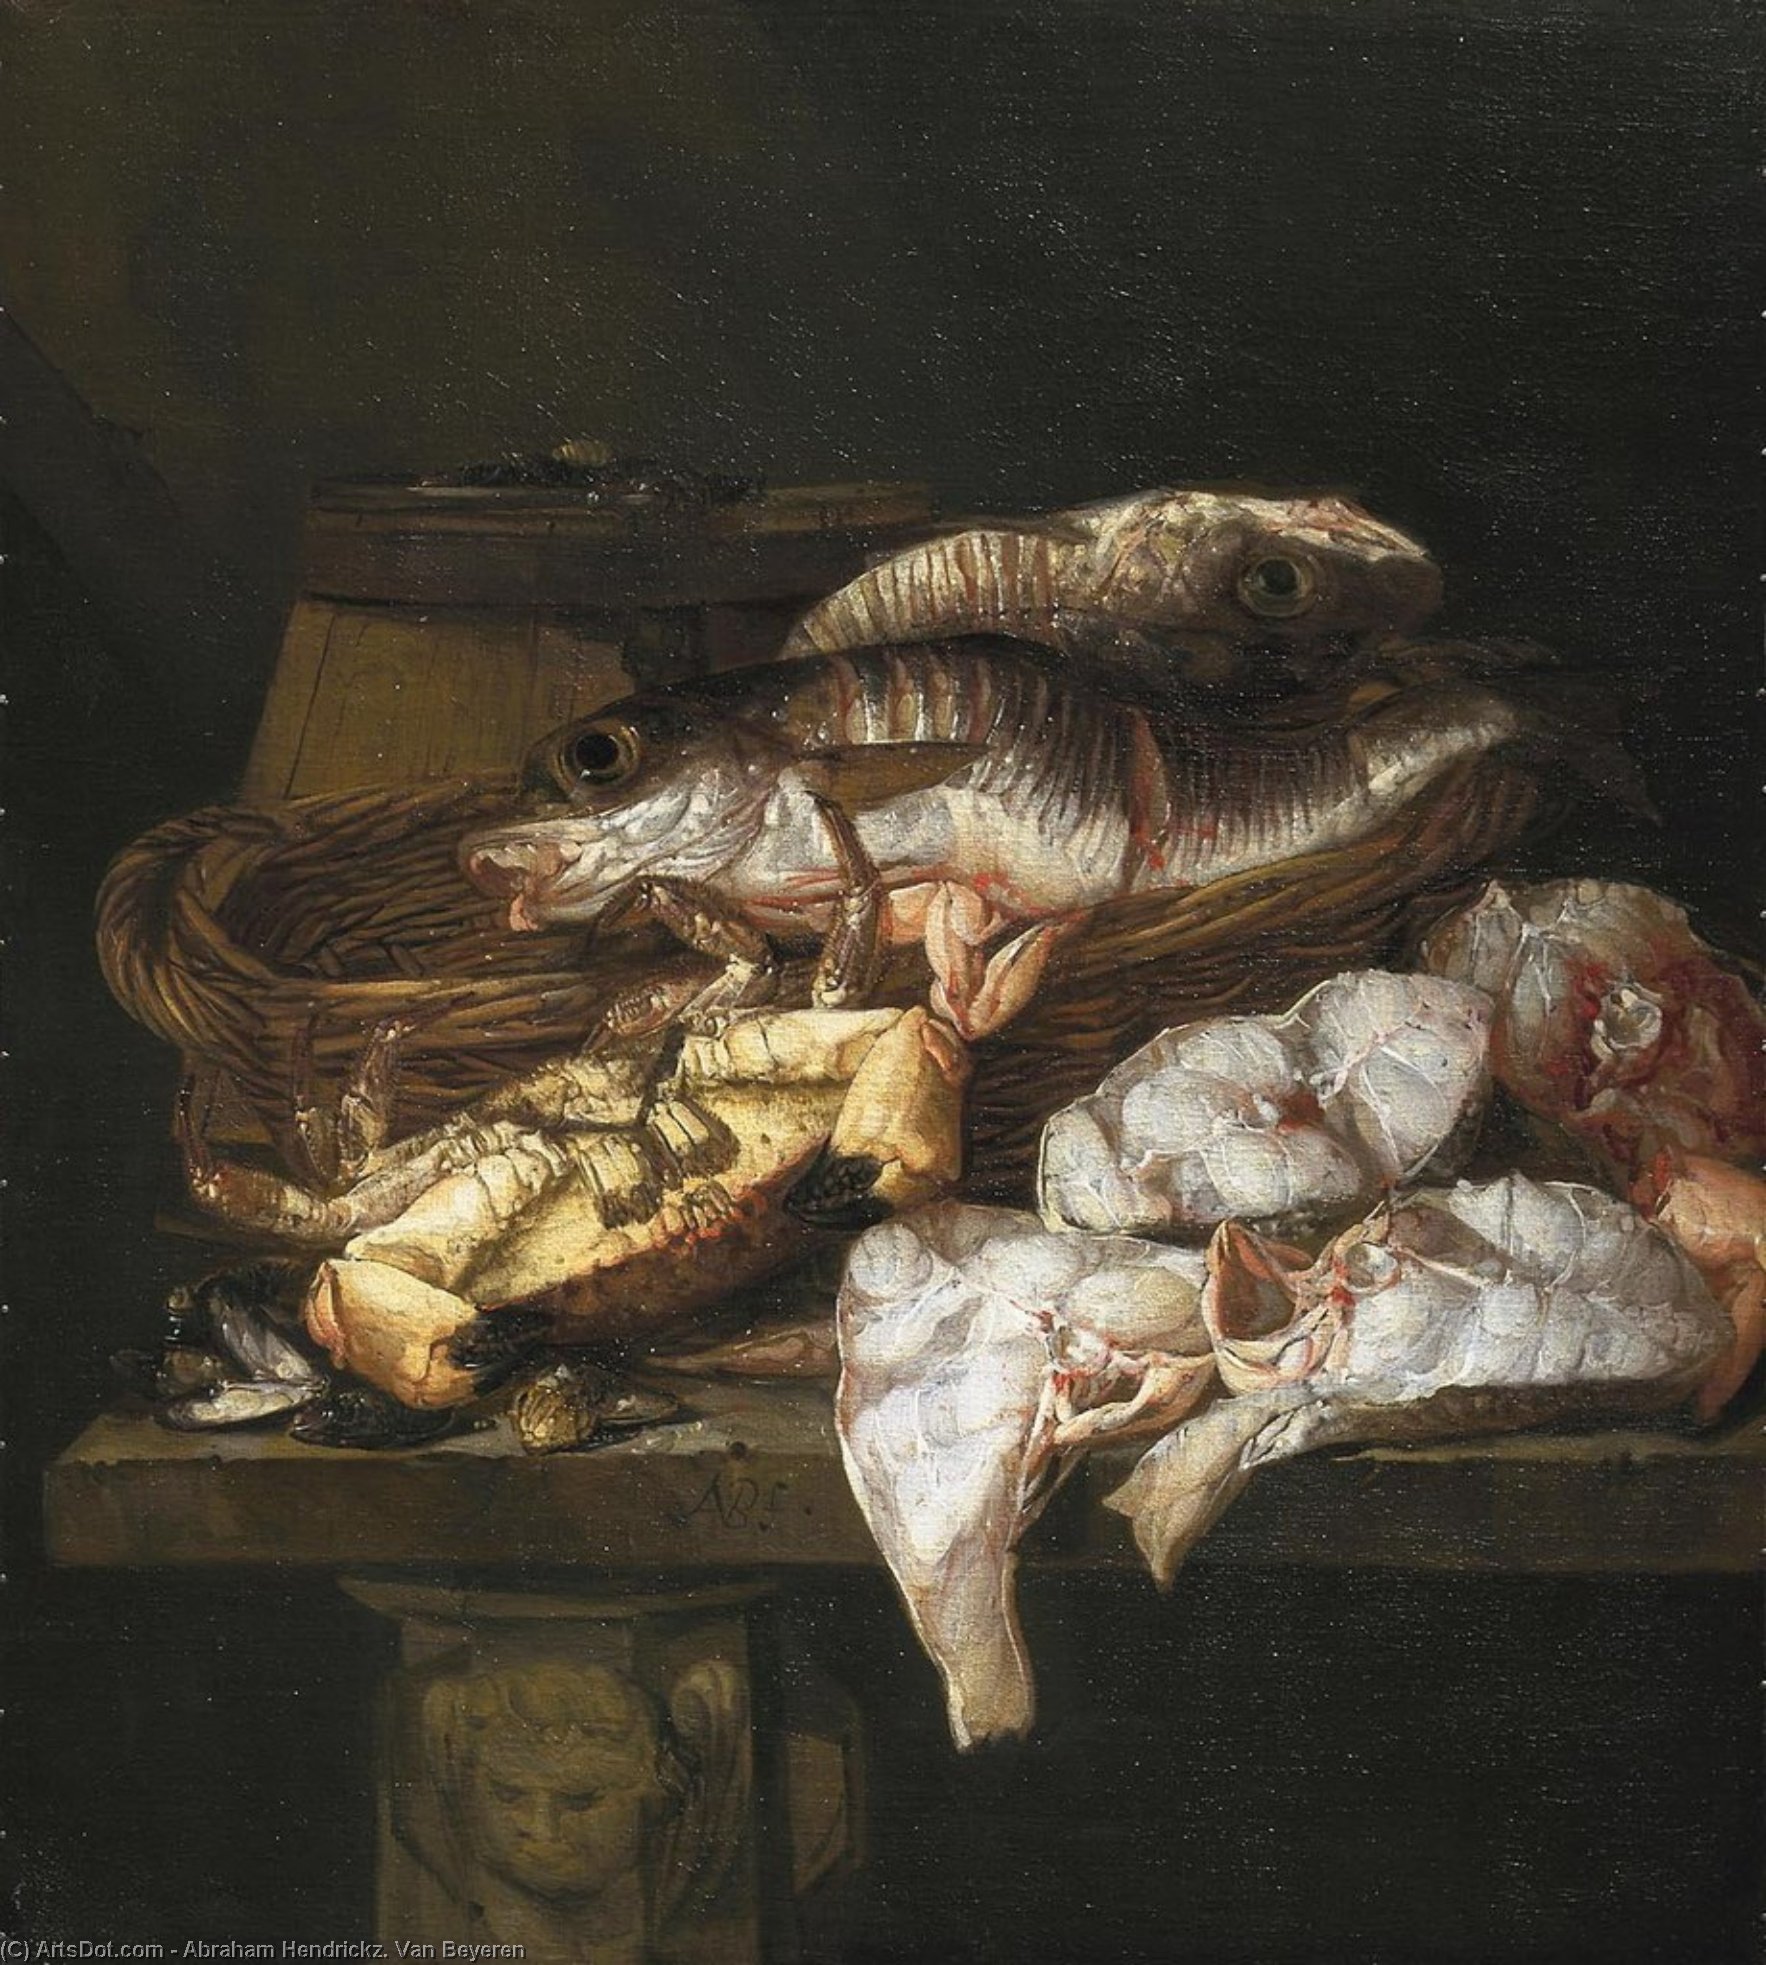 Buy Museum Art Reproductions Still life with Fish (about (75.8 x 68) (The Hague, the Royal Gallery Mauritshuis) (1650-1690)) by Abraham Hendriksz Van Beijeren | ArtsDot.com